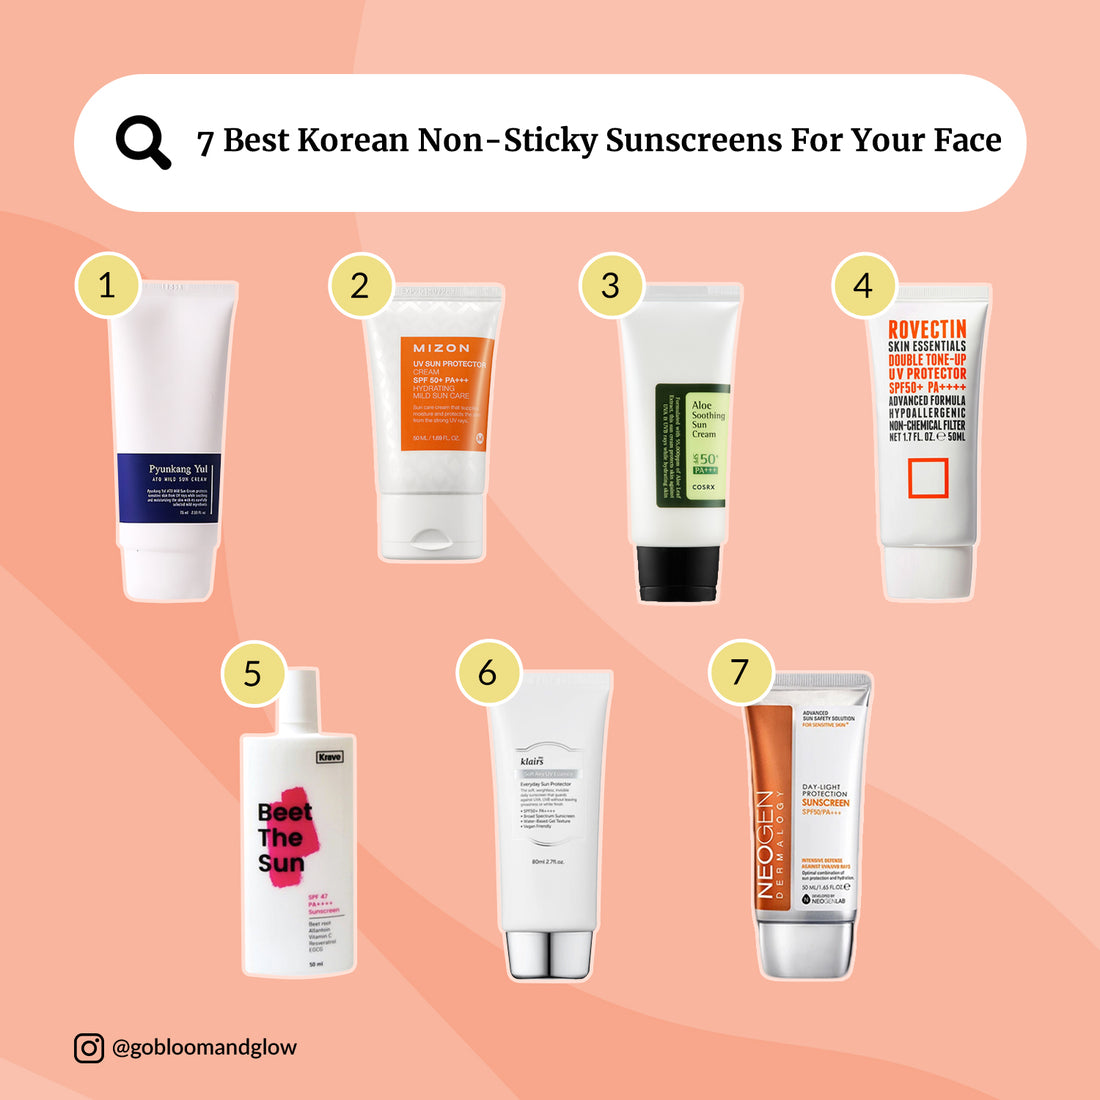 7 Best Korean Non-Sticky Sunscreens For Your Face